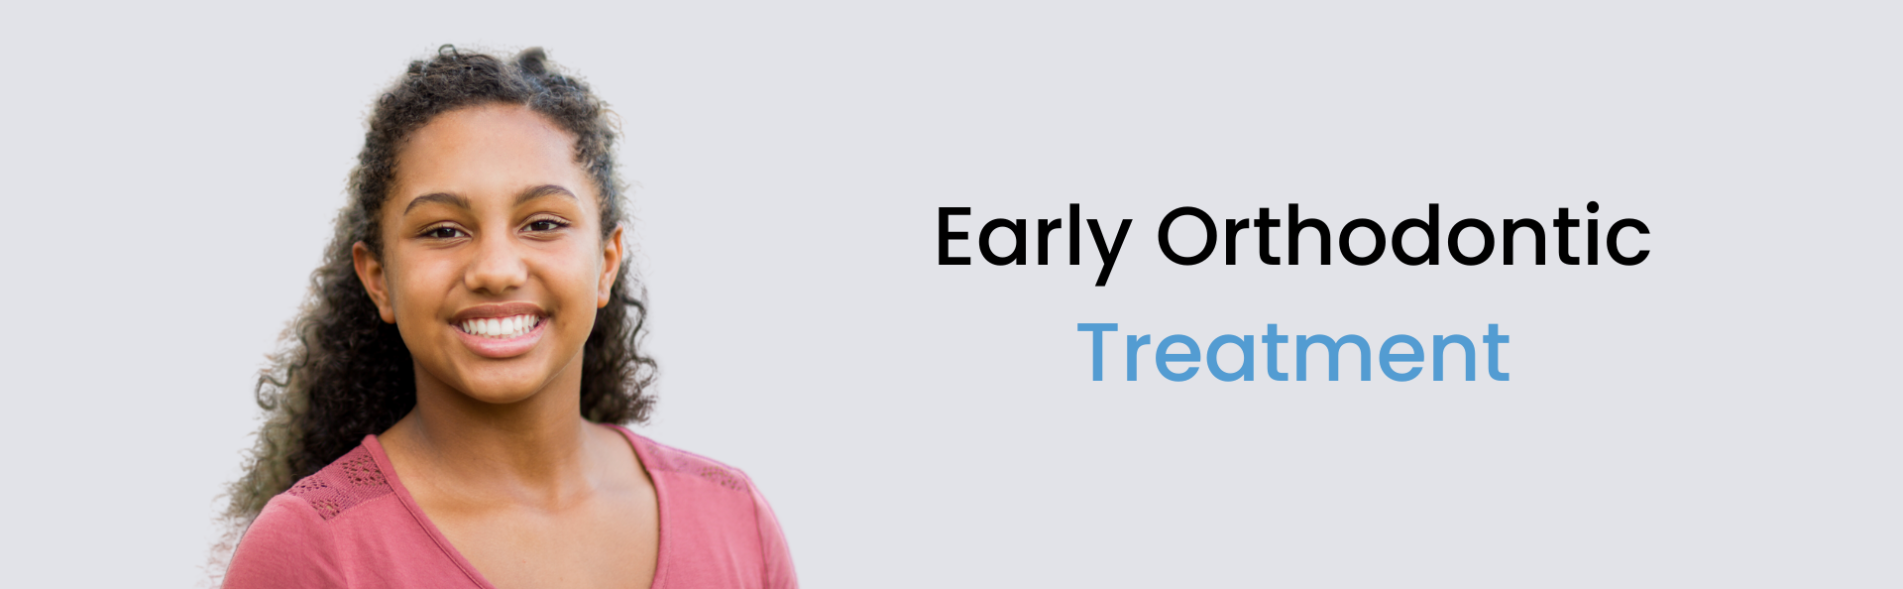 early orthodontic treatment